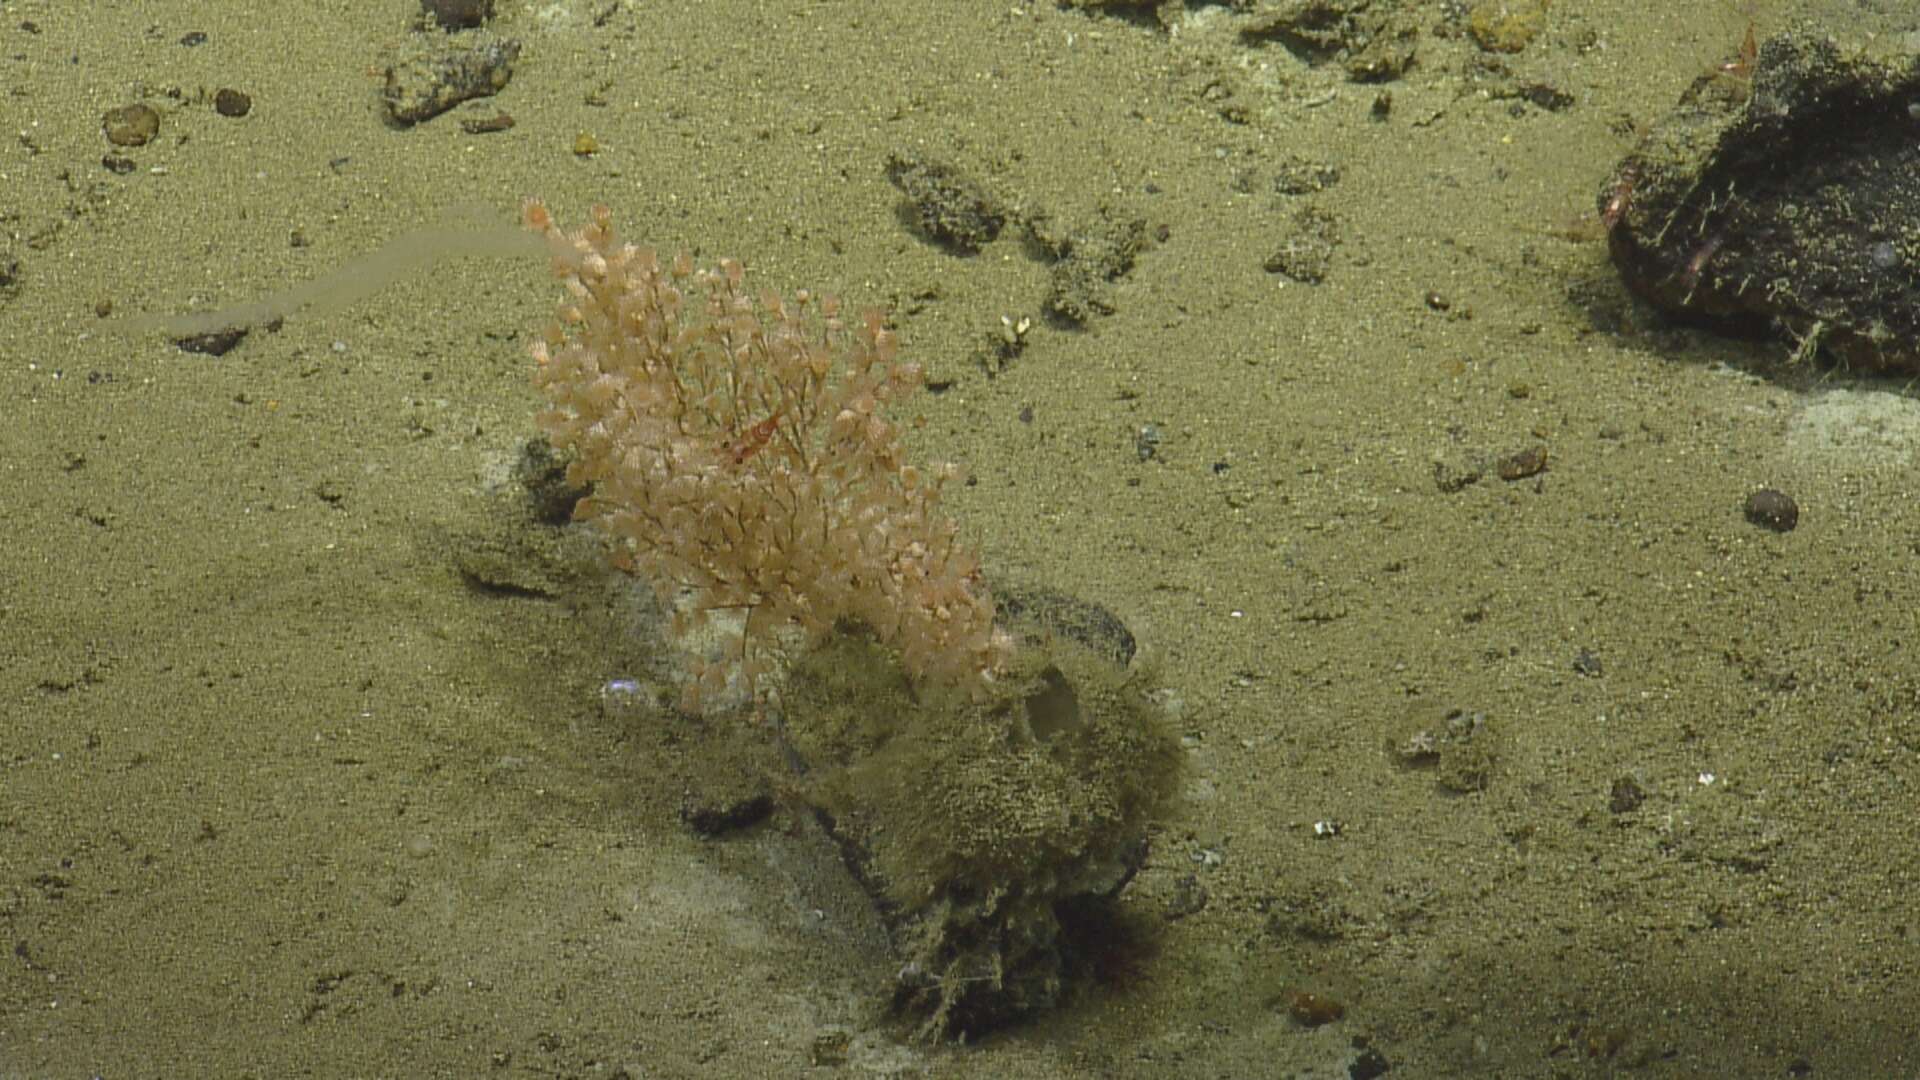 Image of bare-bellied tree coral